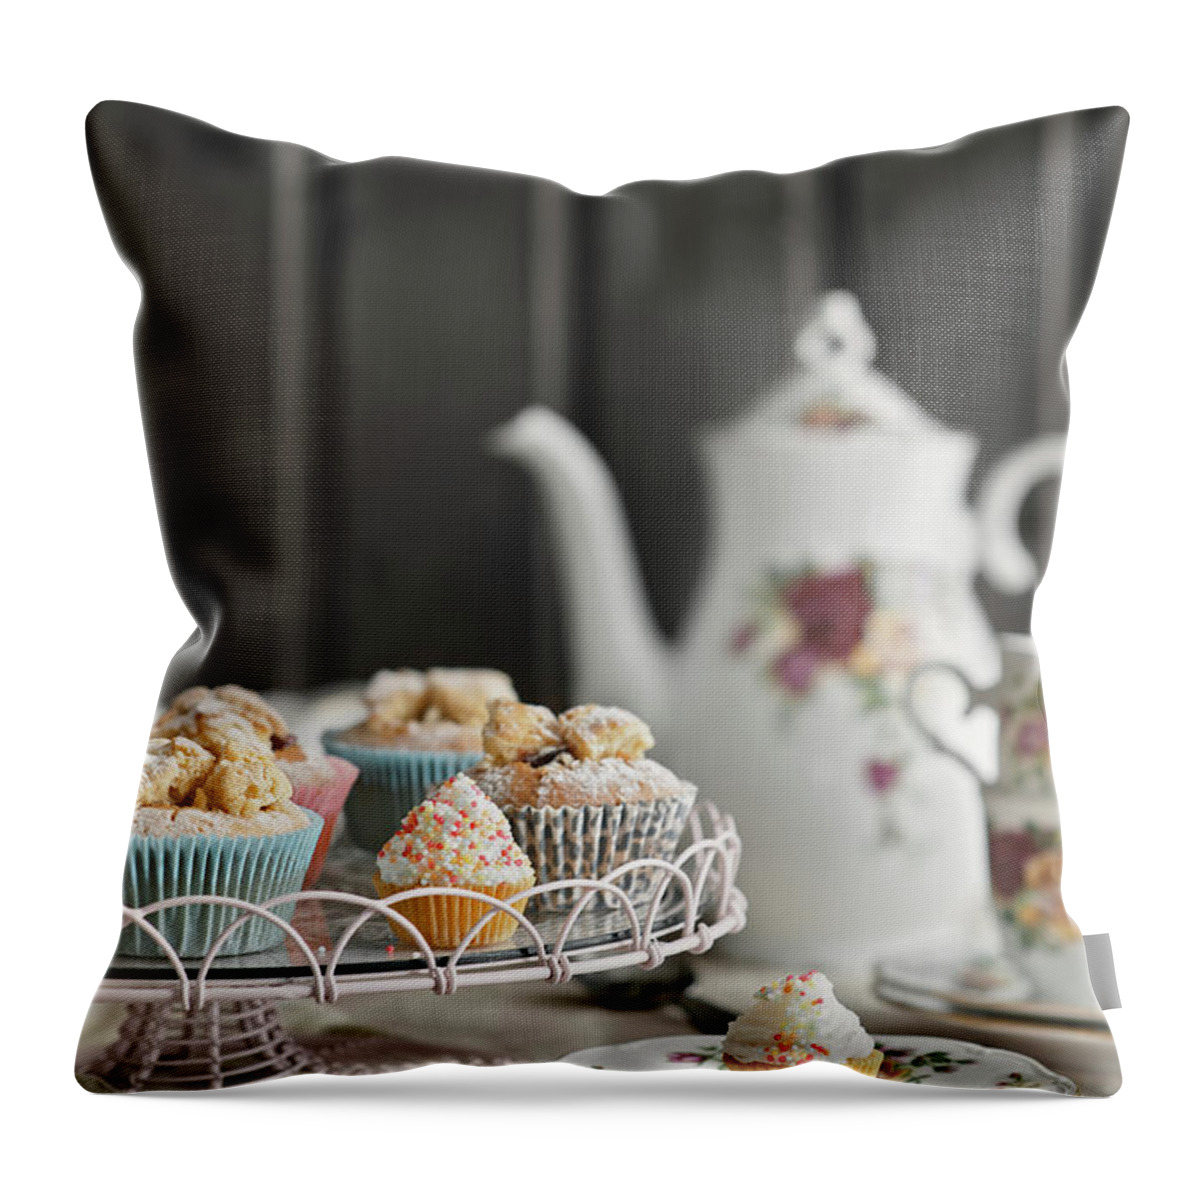 Switzerland Throw Pillow featuring the photograph Cupcakes by A.y. Photography